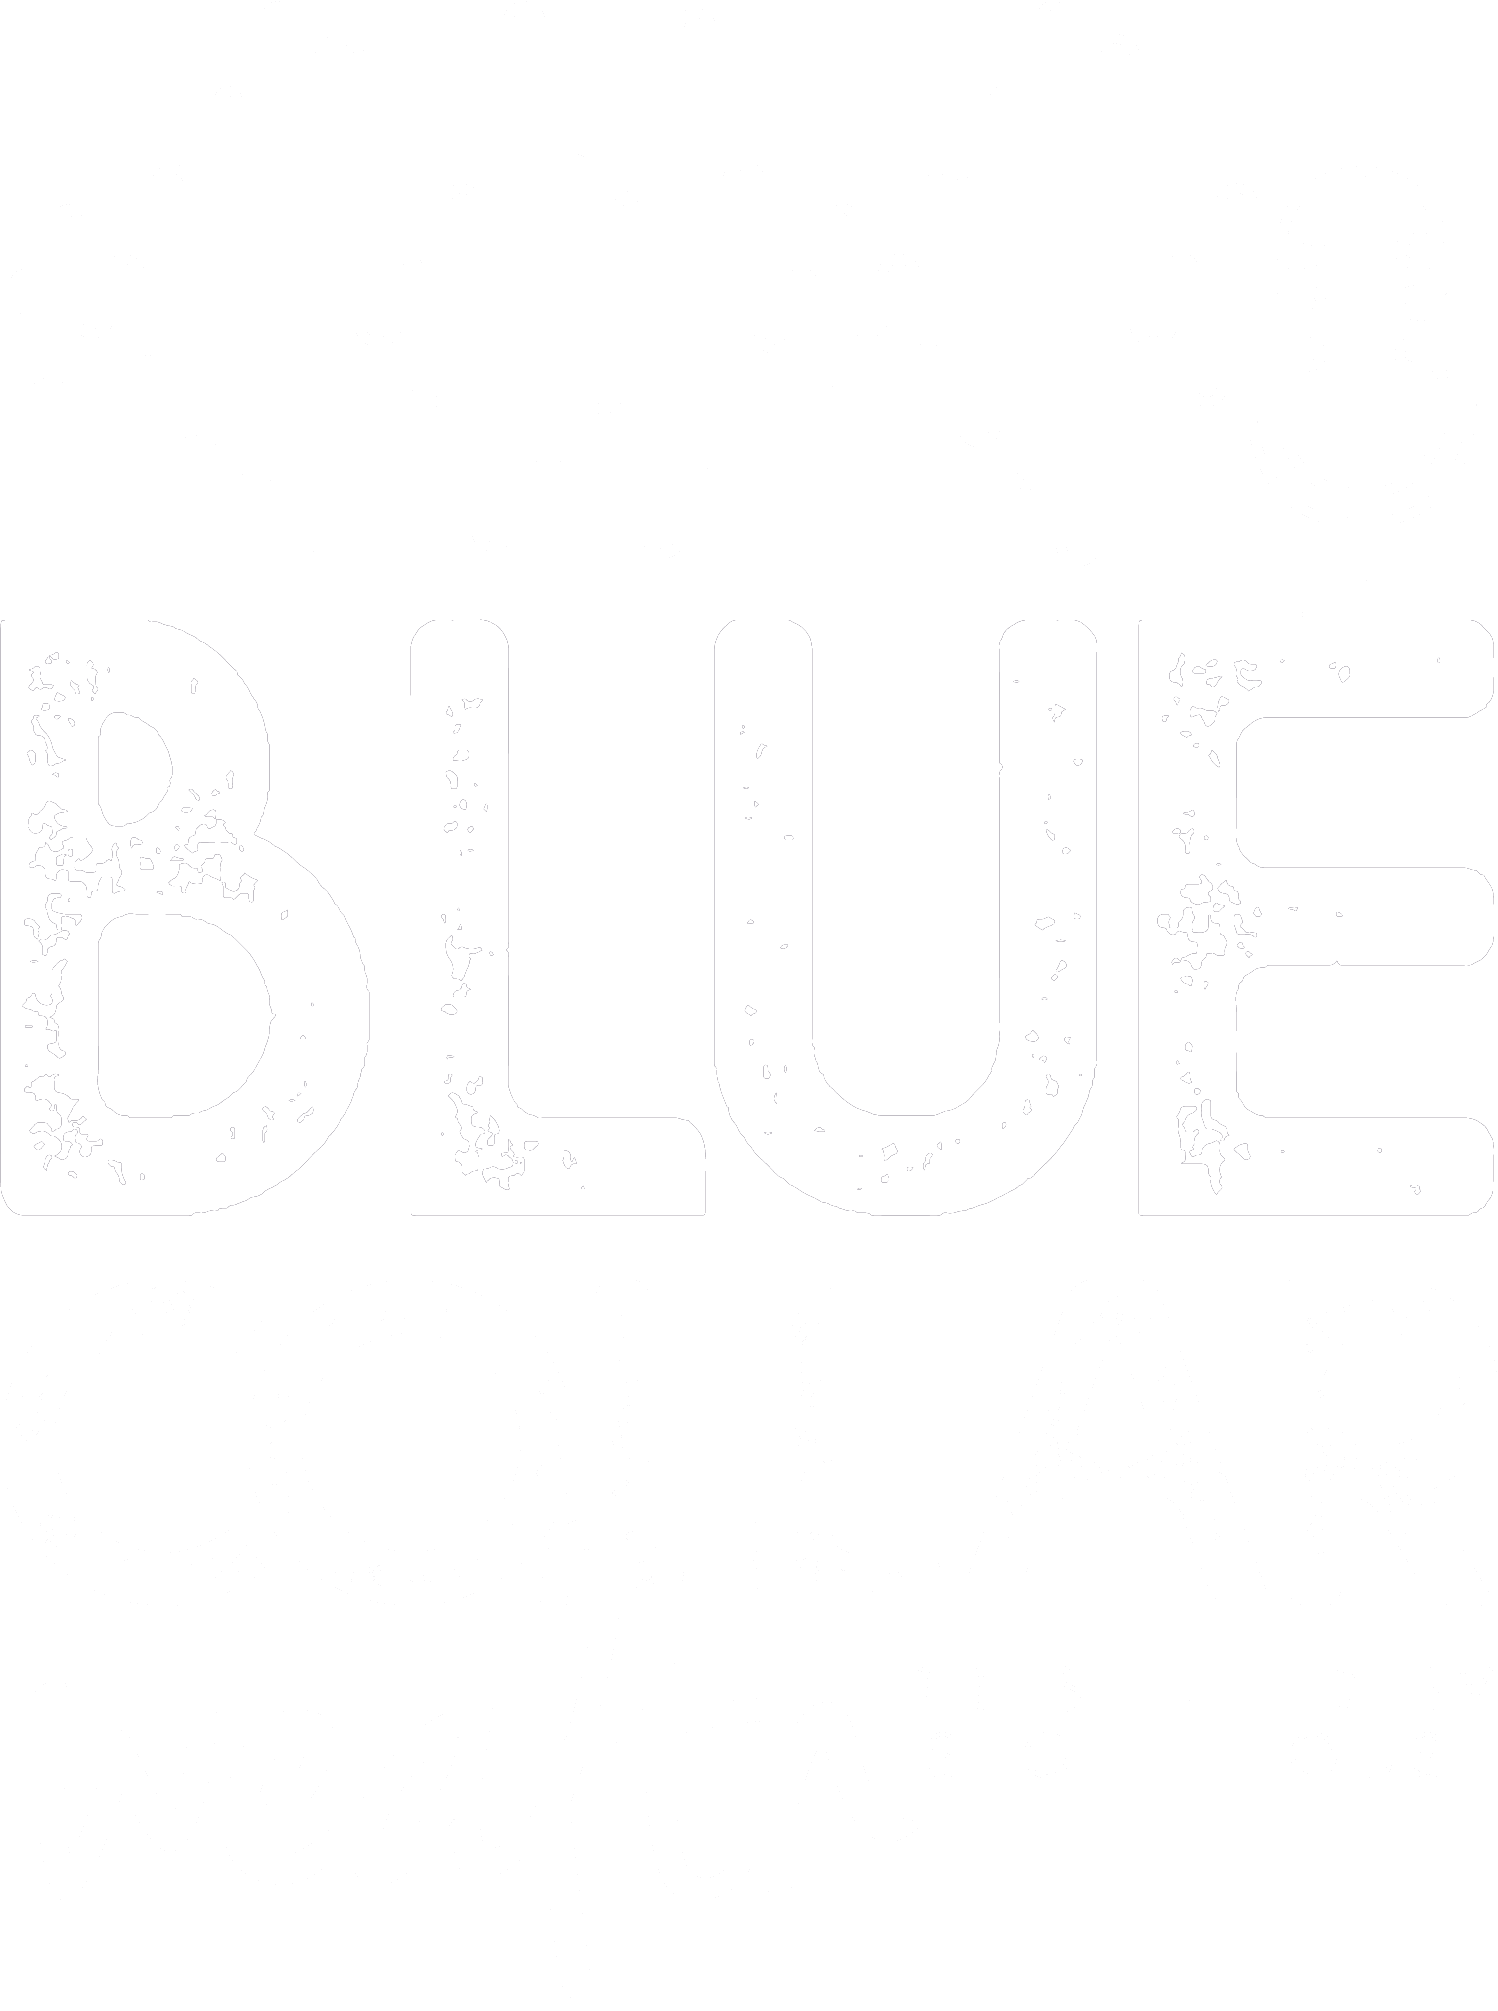 Blue Collar Wealth Video Podcast